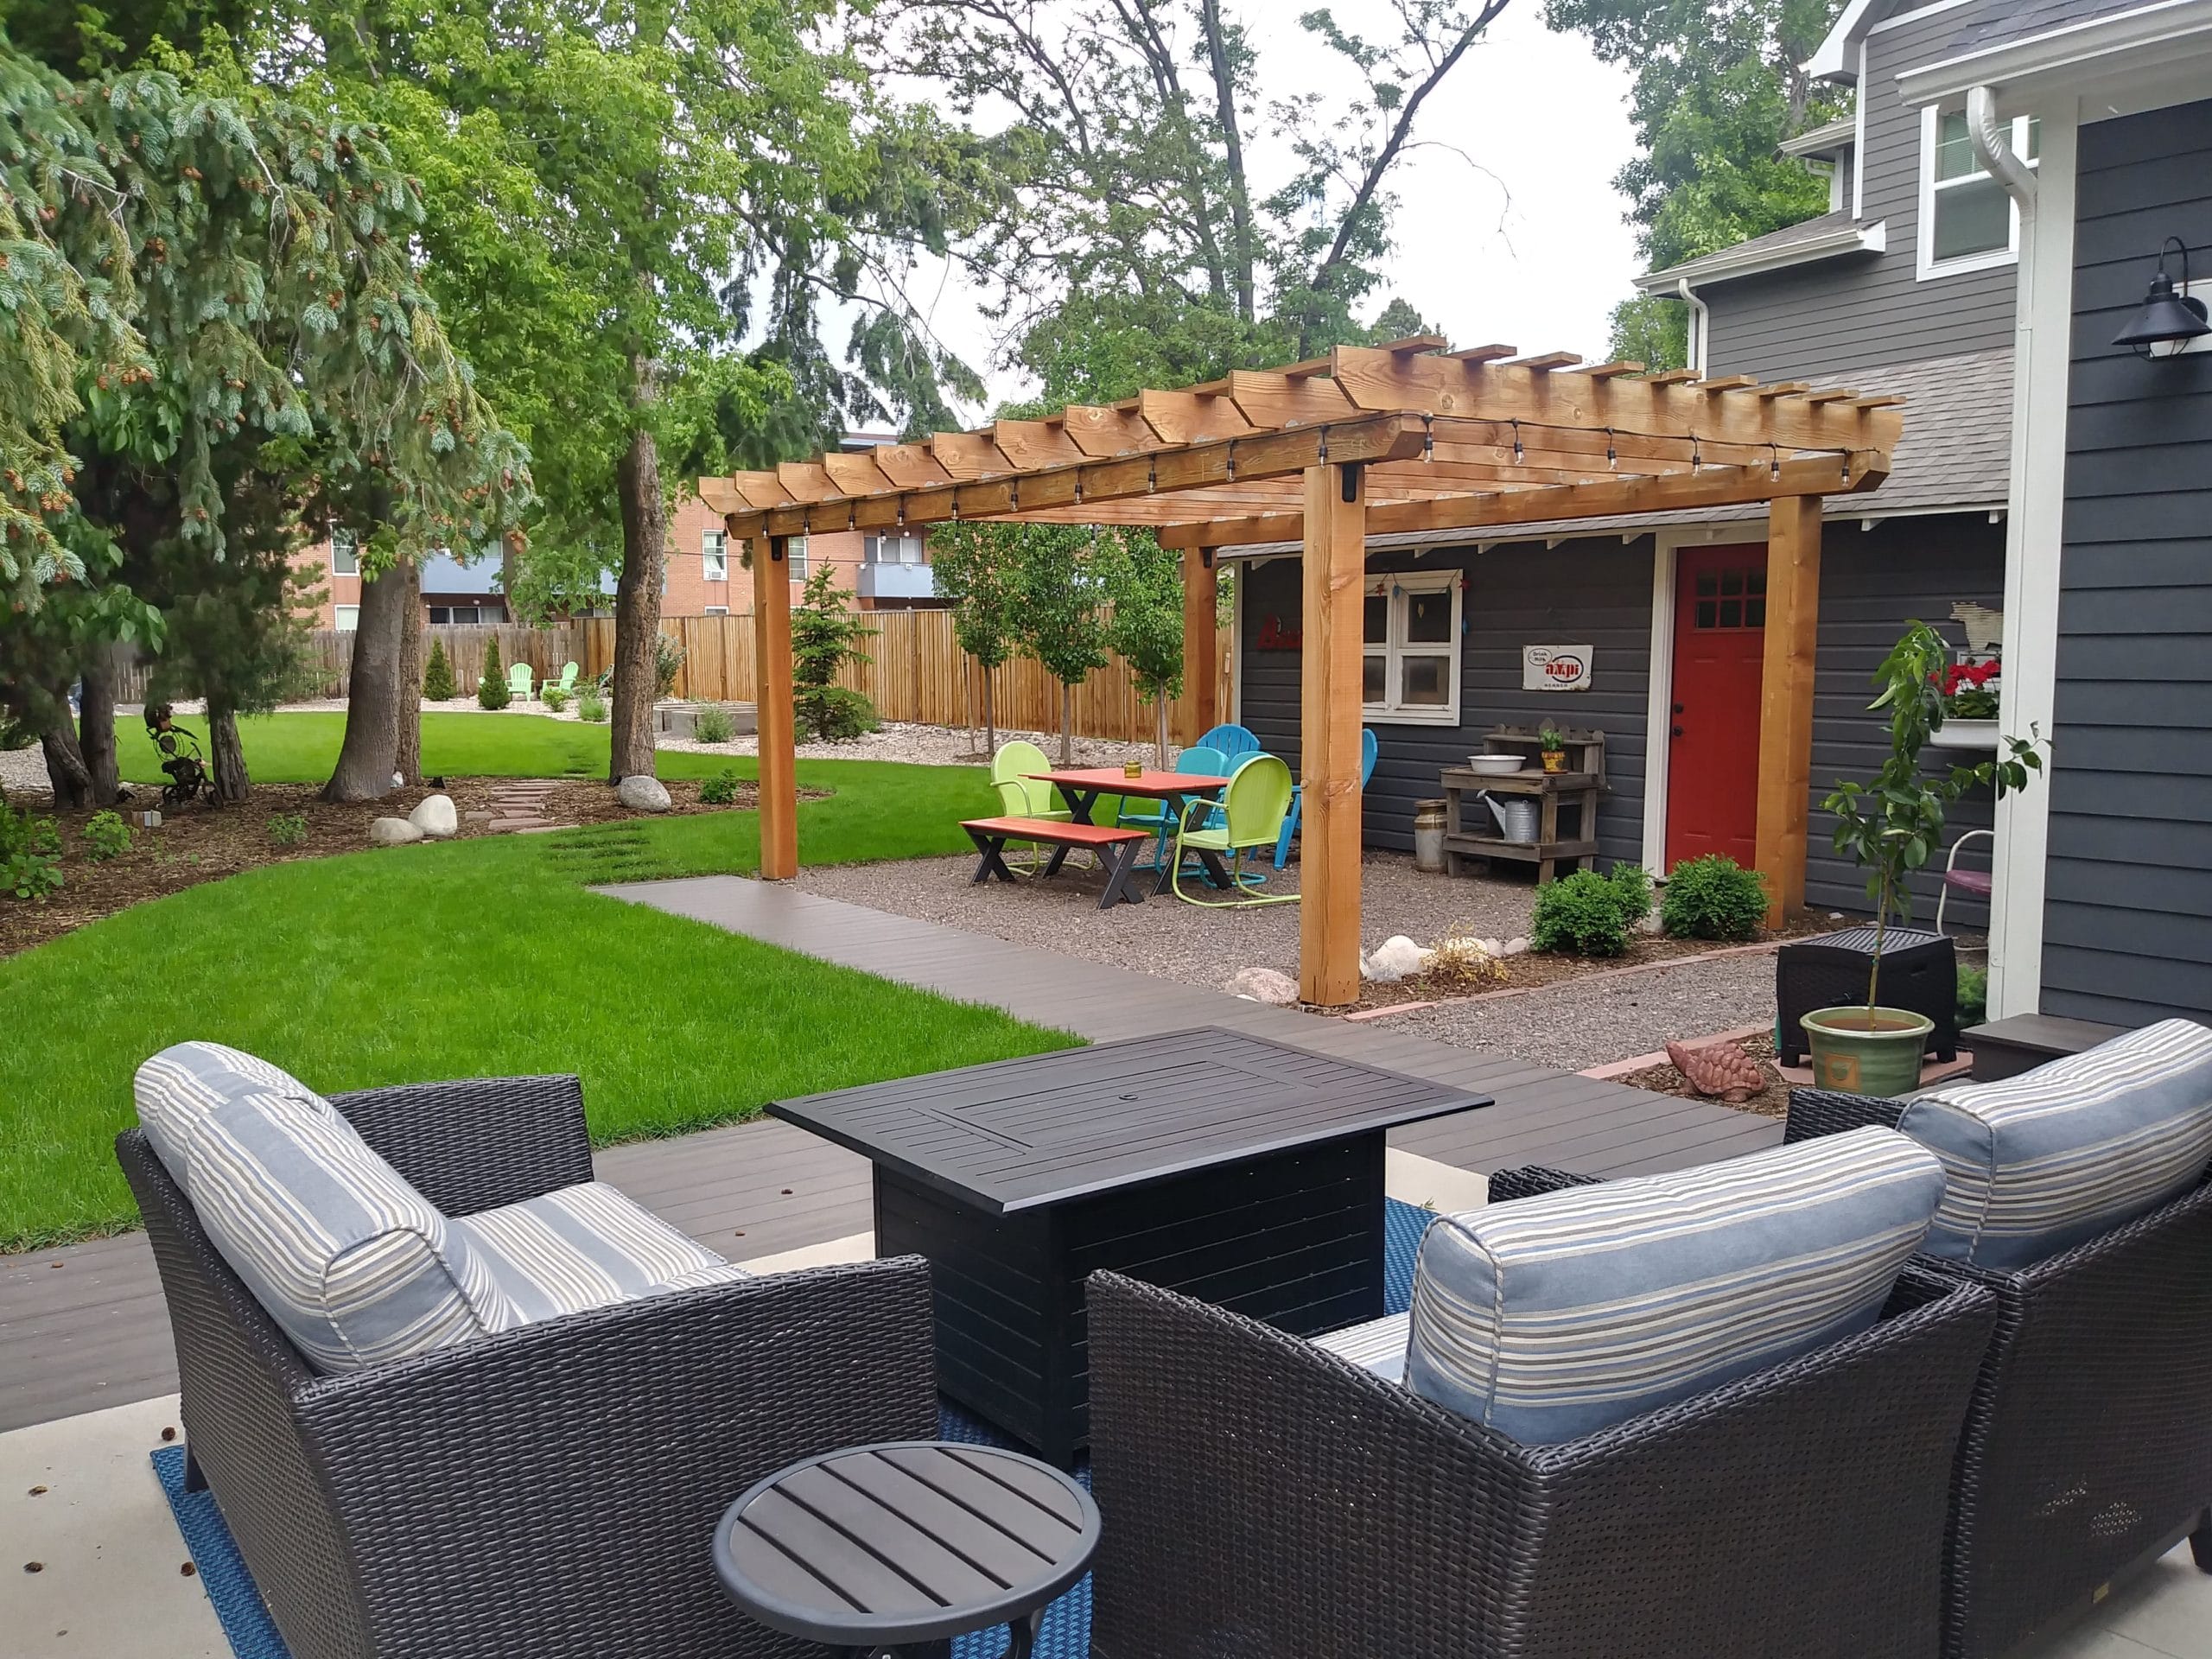 Small gravel patio with seating and pergola over head with grass and trees all around.